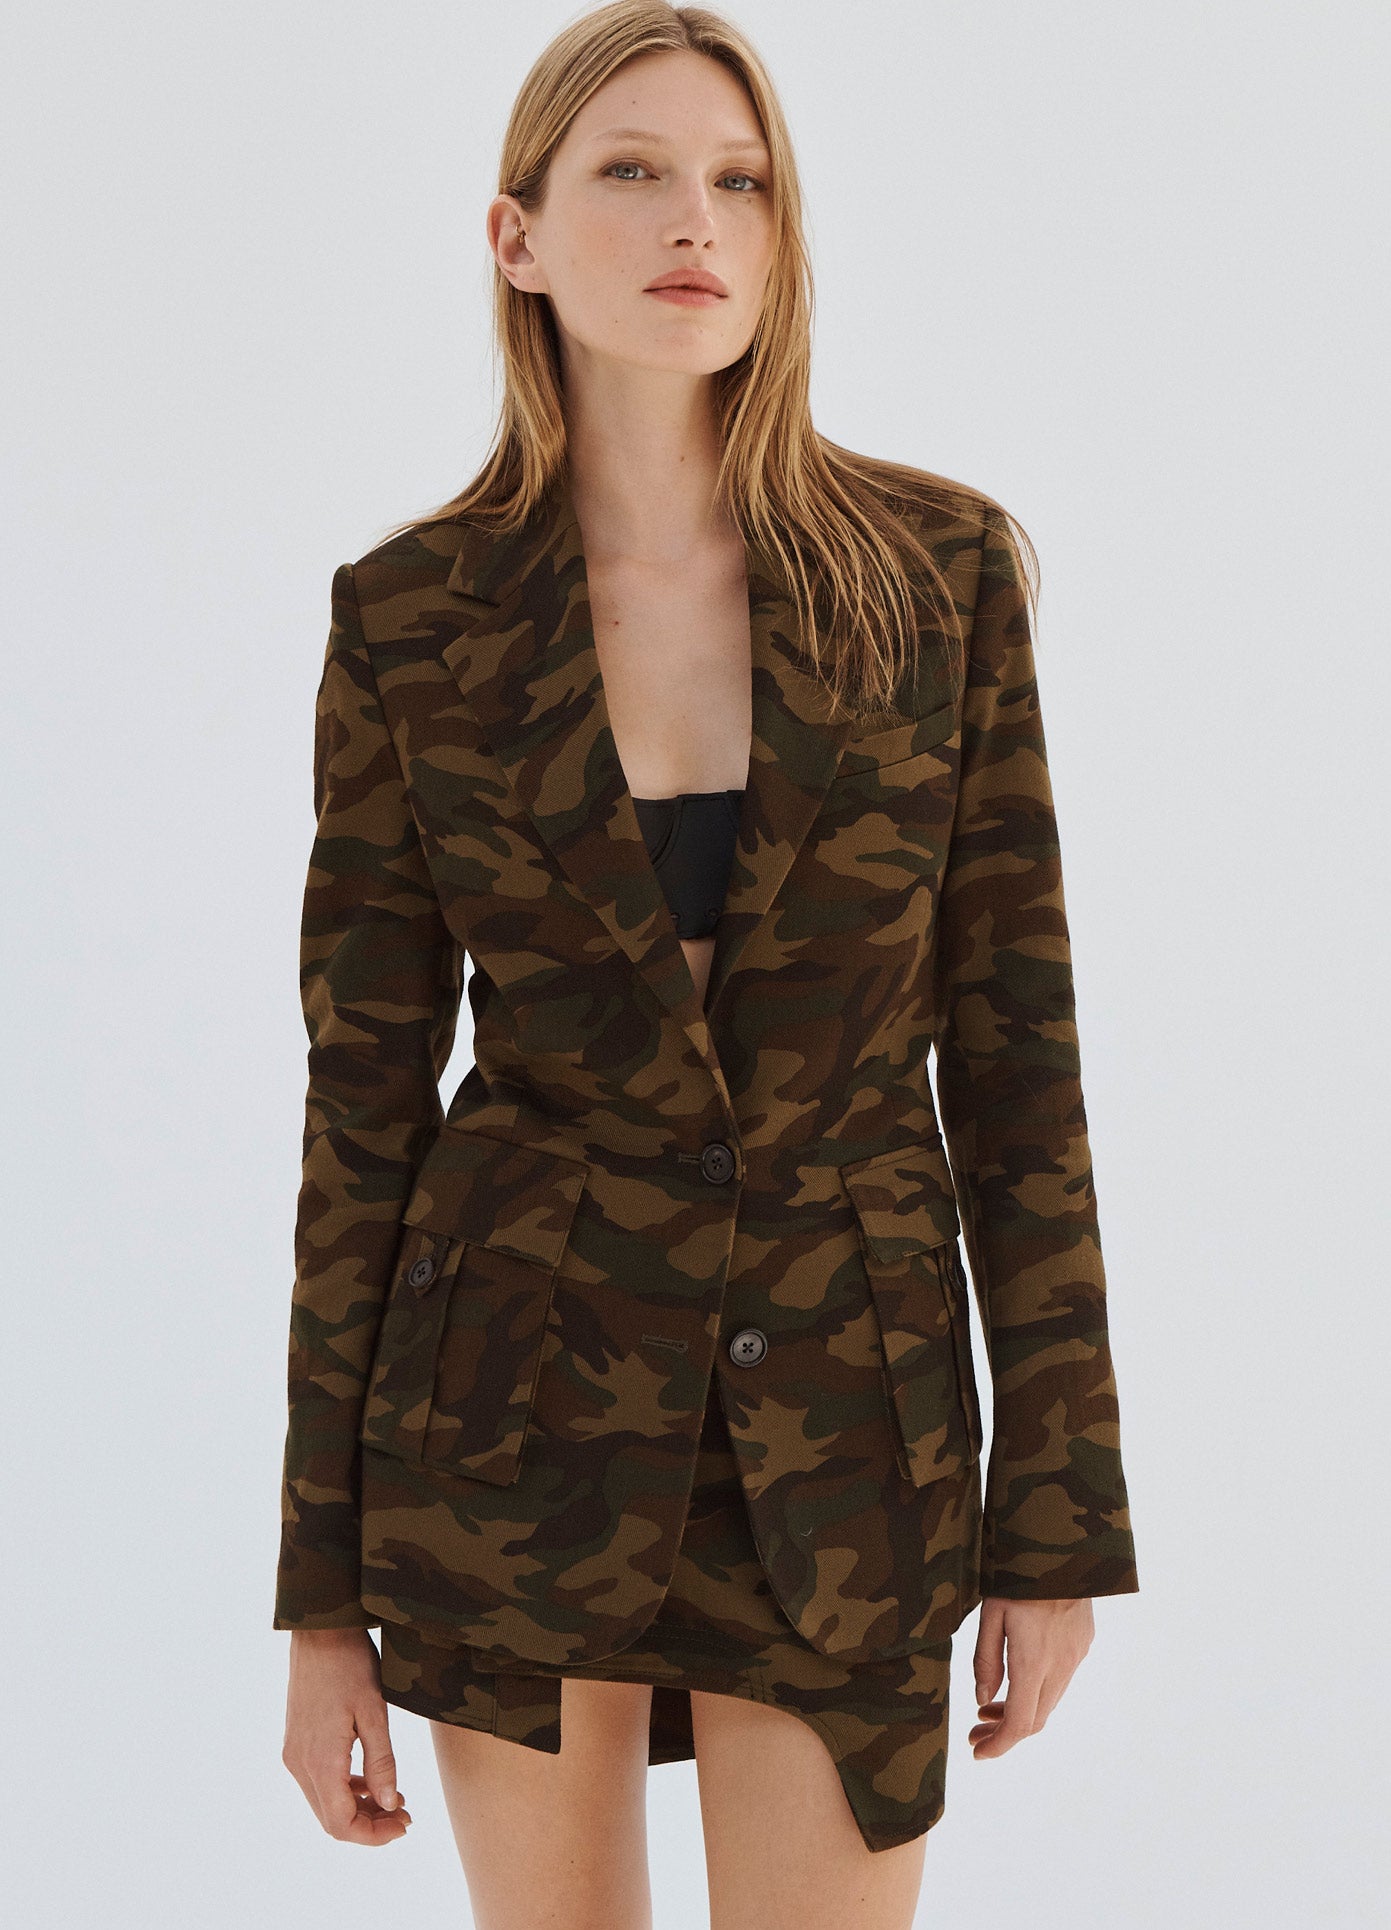 MONSE Camo Back Cut Out Jacket on Model Buttoned Up Front View